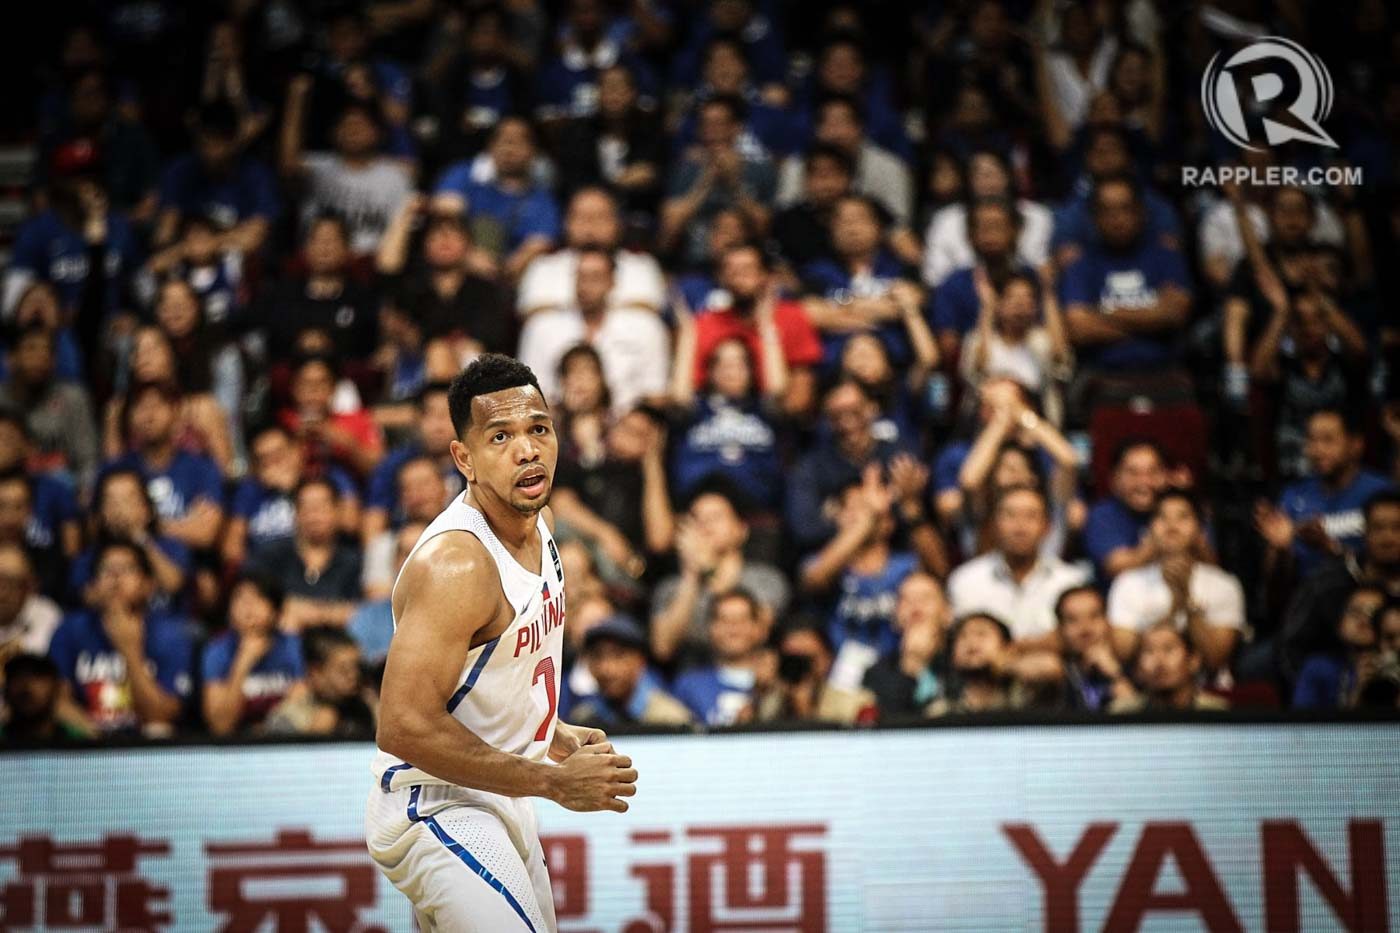 Jayson Castro may retire from Gilas after FIBA OQT disappointment